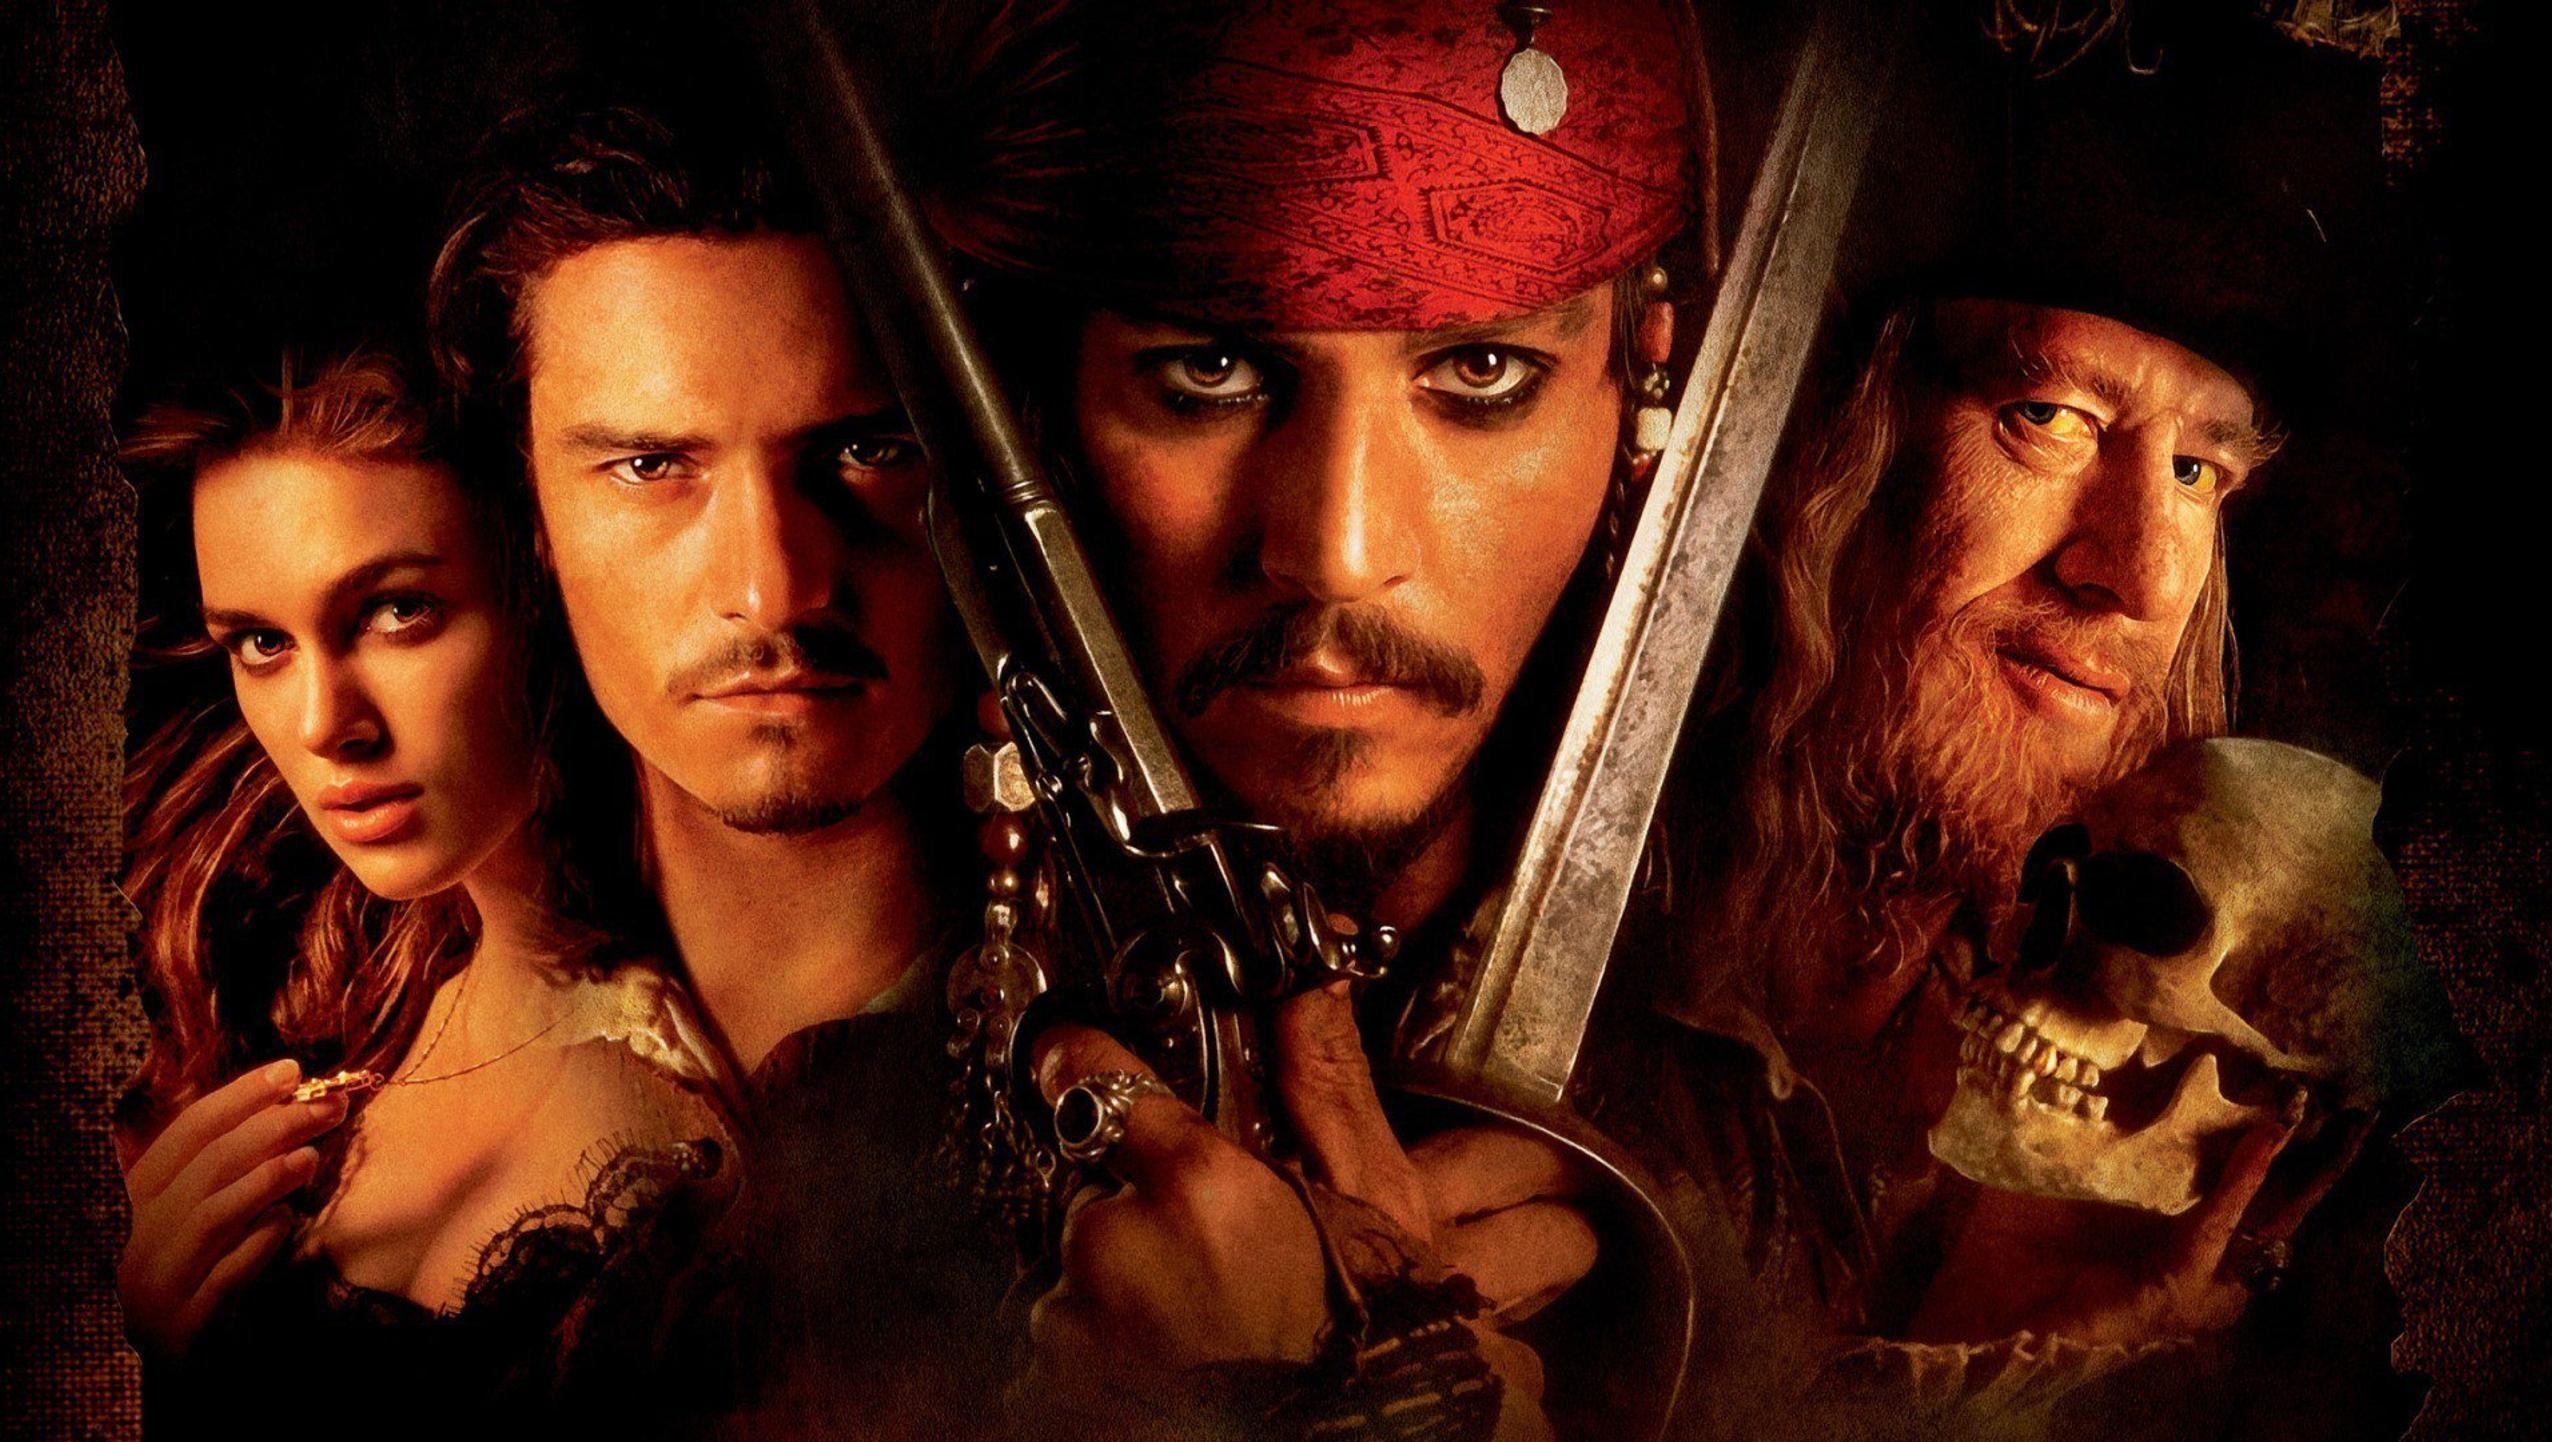 Pirates of the Caribbean: The Curse of the Black Pearl, Jack Sparrow (Johnny Depp) and blacksmith Will Turner (Orlando Bloom). 2560x1450 HD Wallpaper.